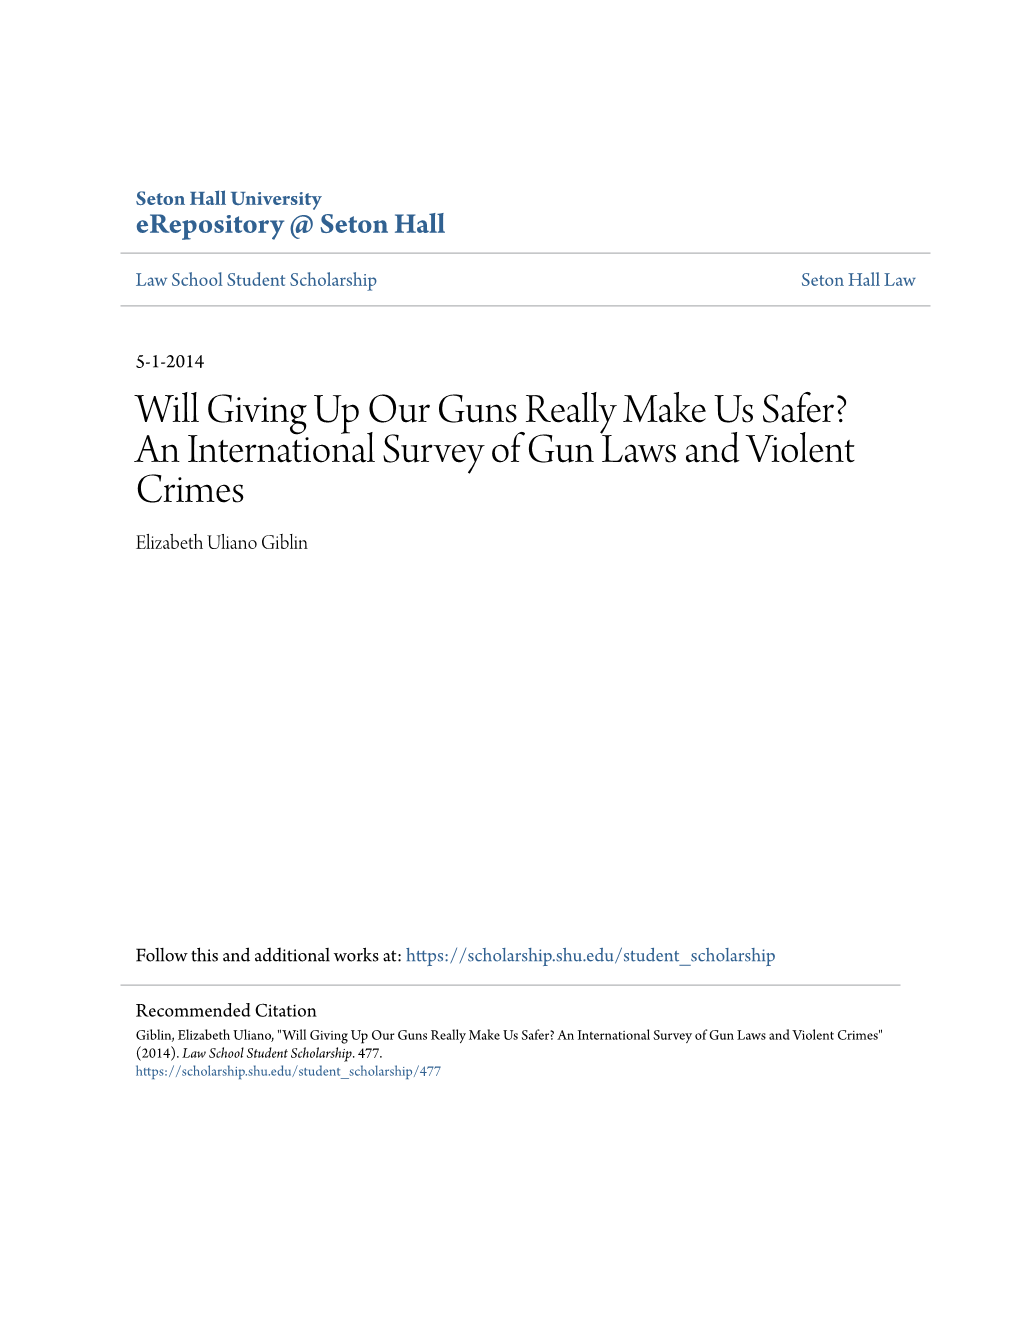 Will Giving up Our Guns Really Make Us Safer? an International Survey of Gun Laws and Violent Crimes Elizabeth Uliano Giblin